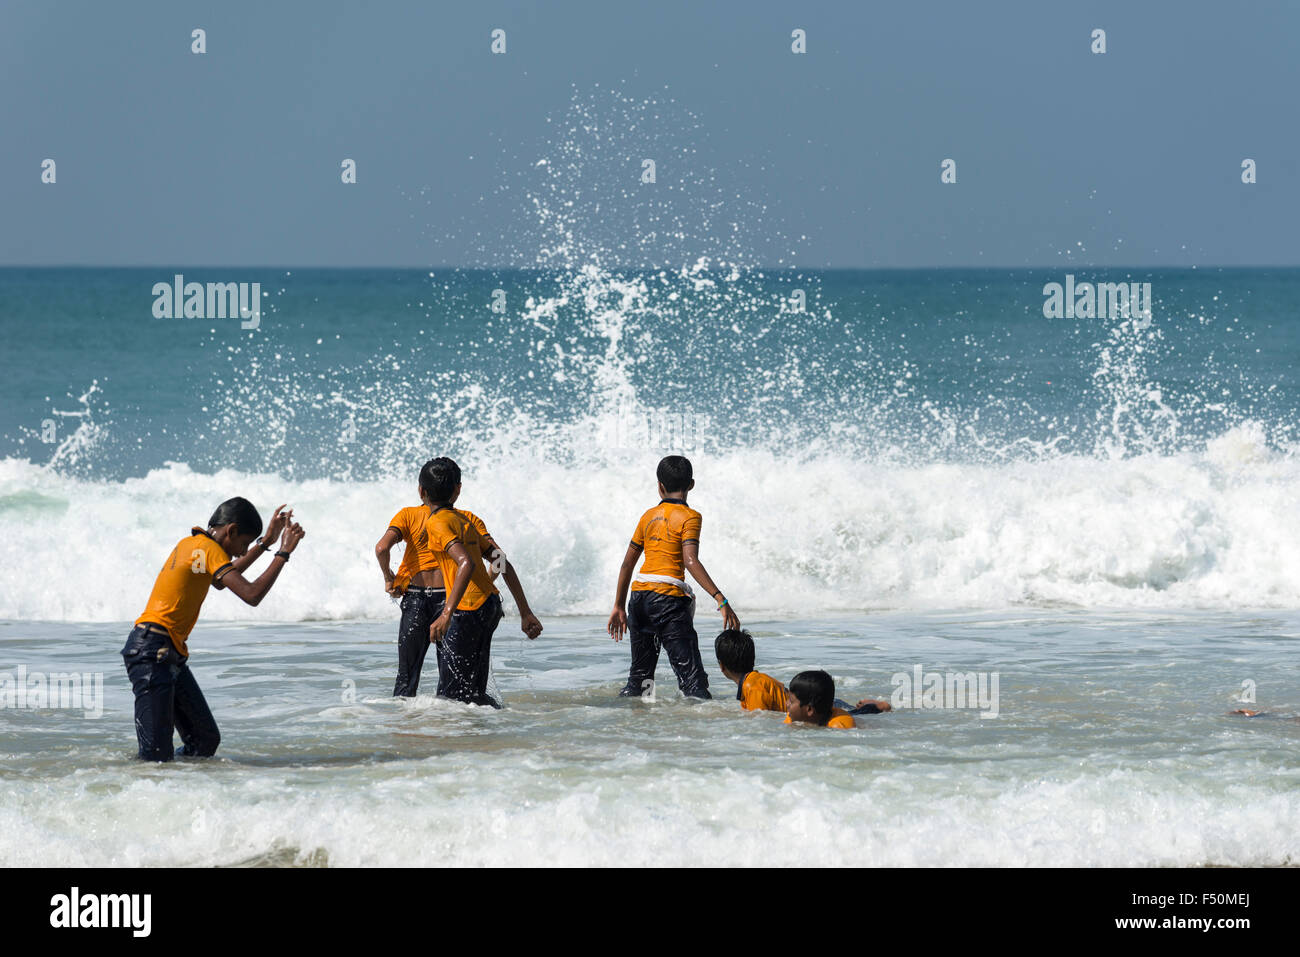 A group of schoolboys, wearing yellow shirts, is standing on the beach, some are playing in the waves Stock Photo